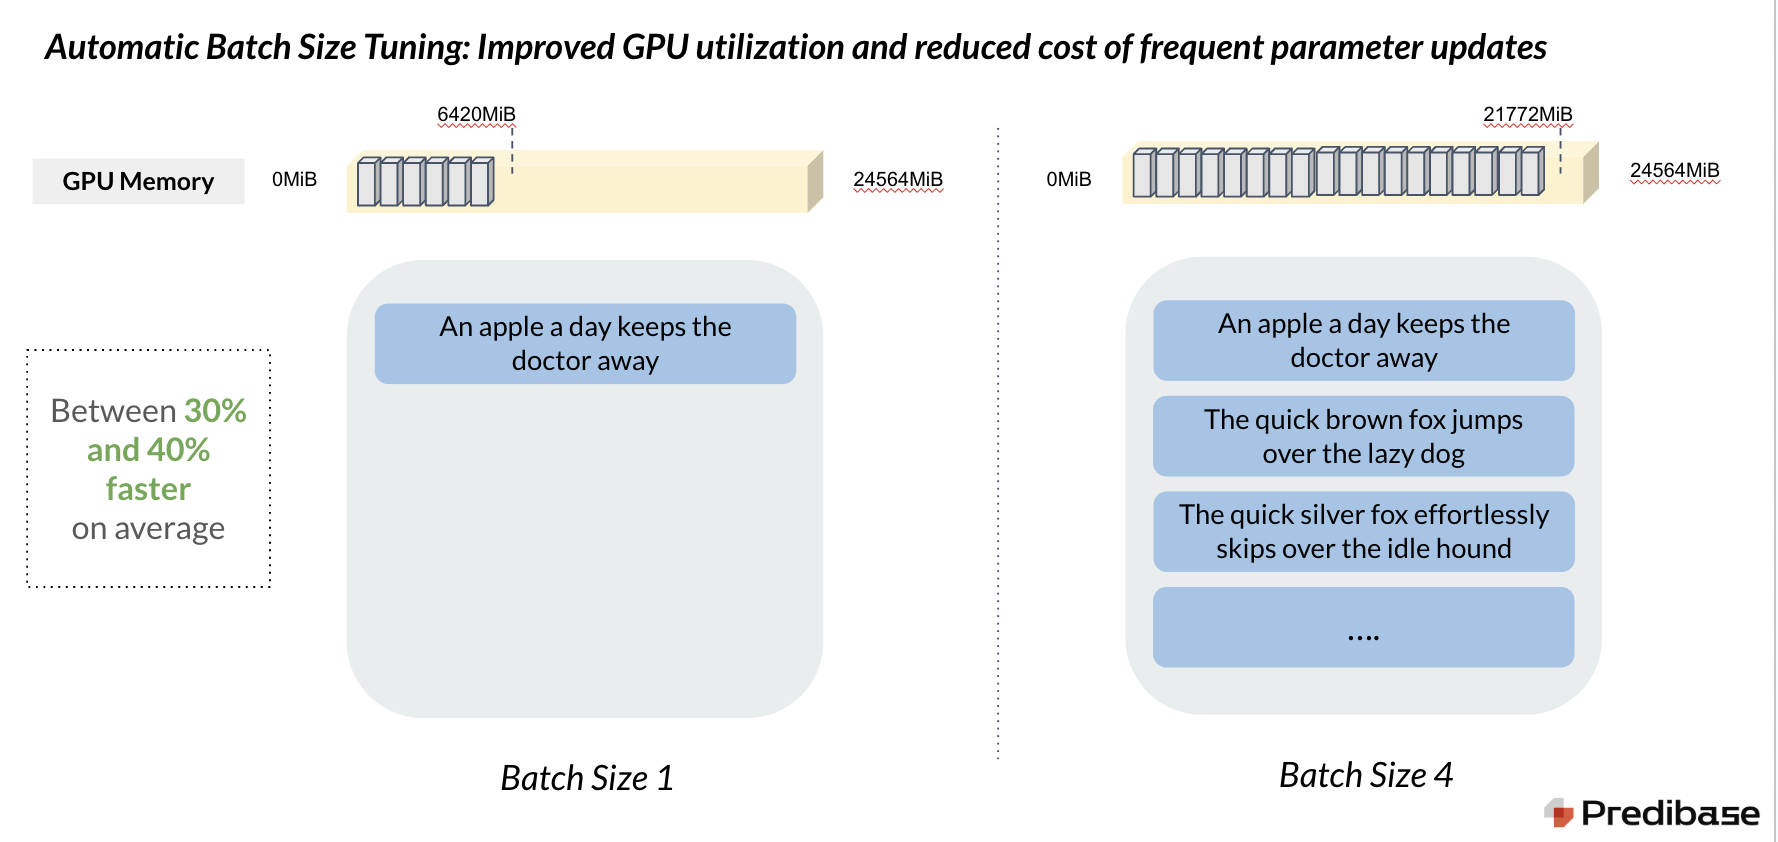 Automatic batch size tuning improved GPU utilization and reduced the cost of frequent parameter updates.